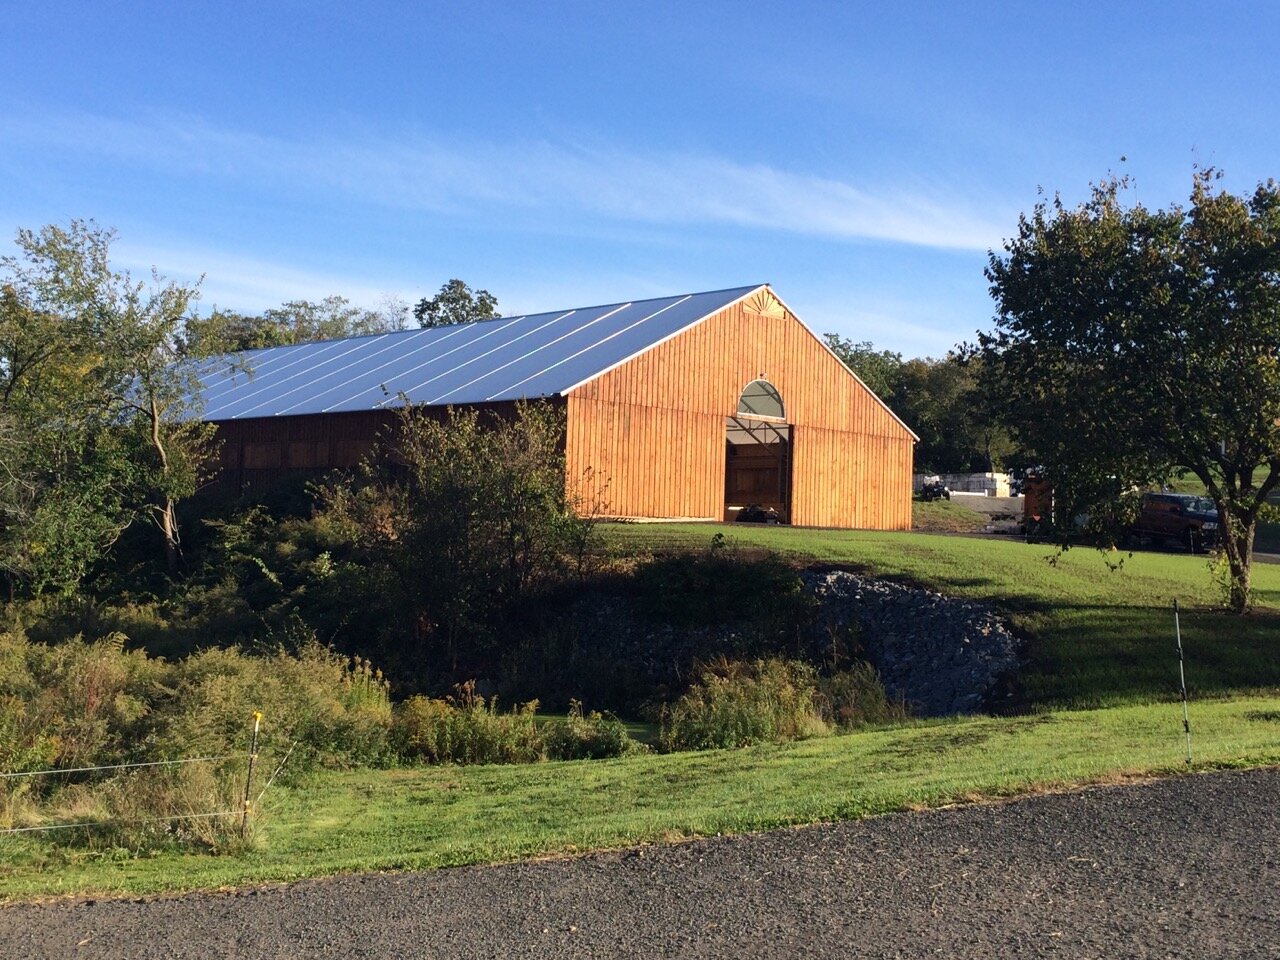 A custom 70’ x 158’ fabric roof wooden riding arena in Ashford, Connecticut.